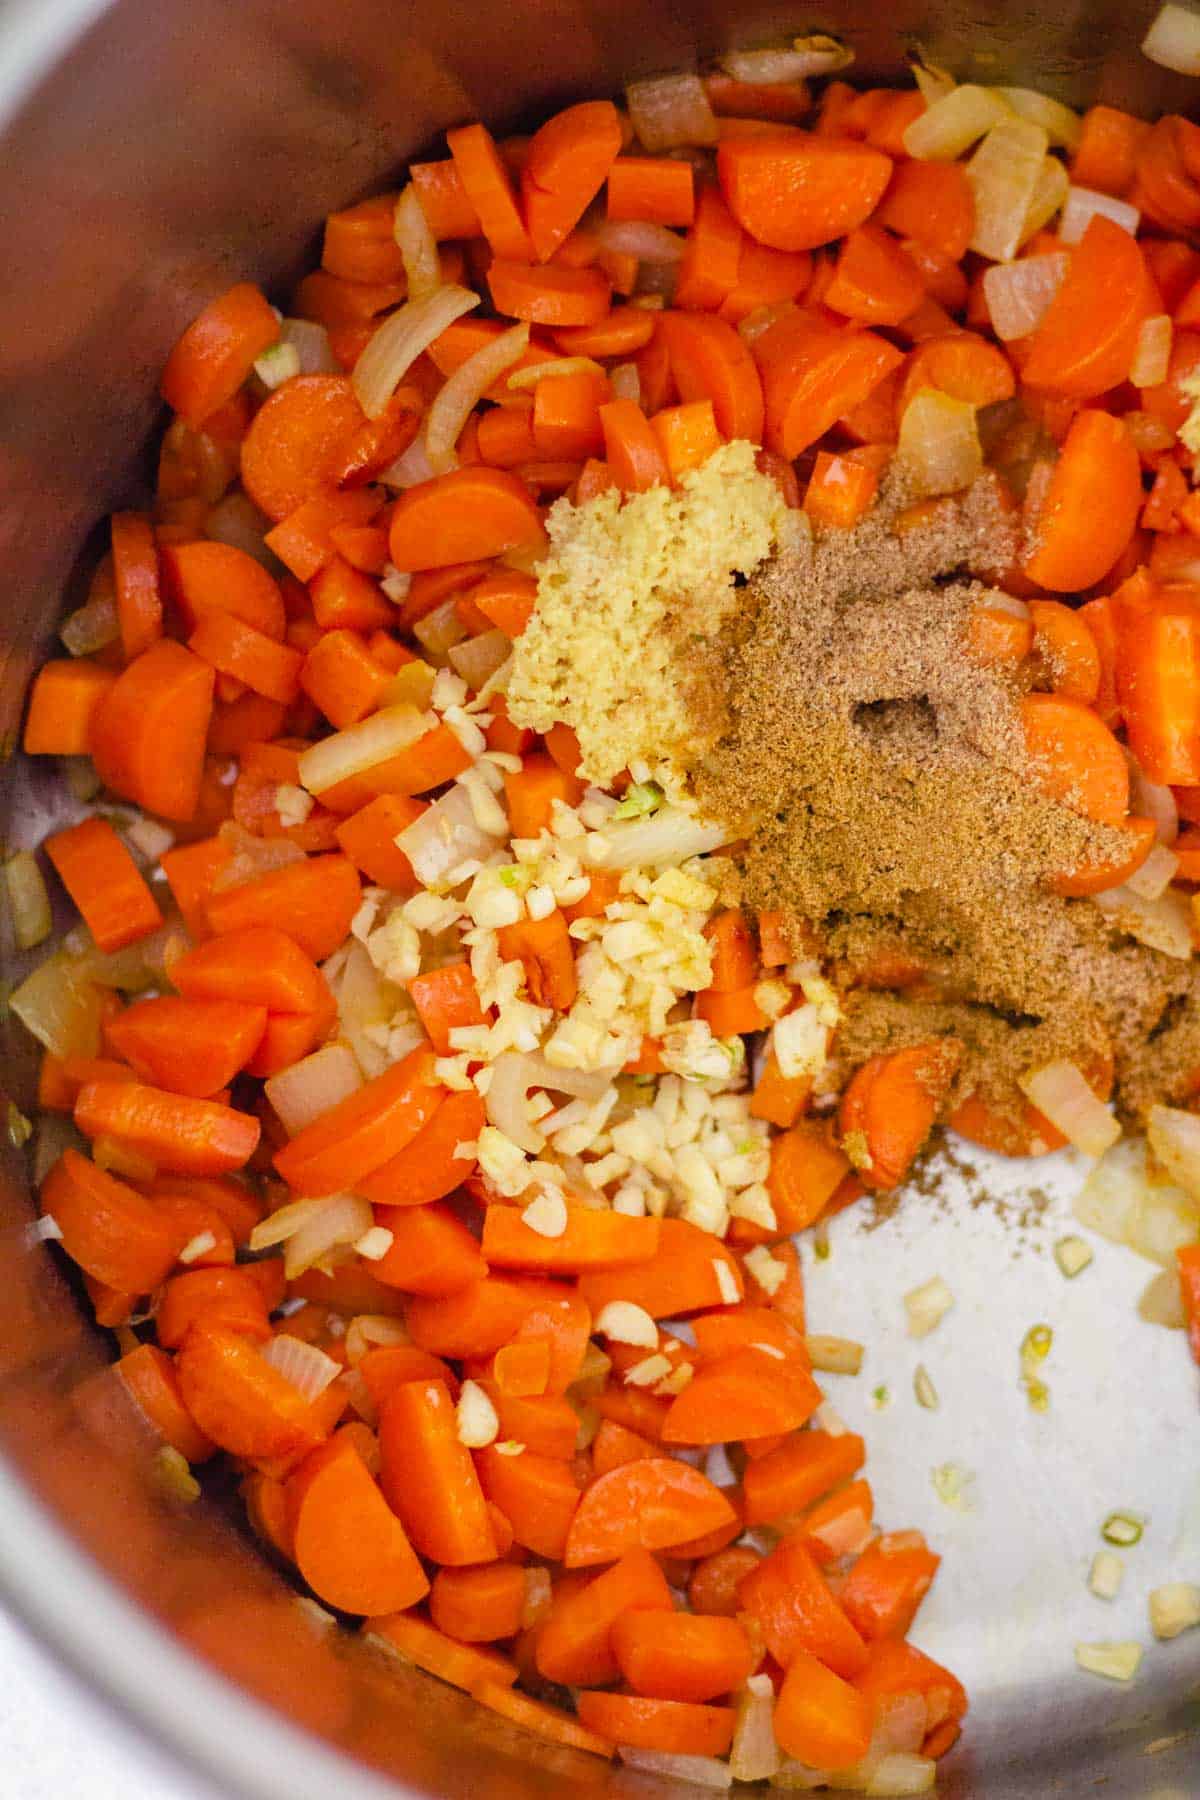 Garlic, ginger, ground spices, carrots, and onion cooking in a large pot.